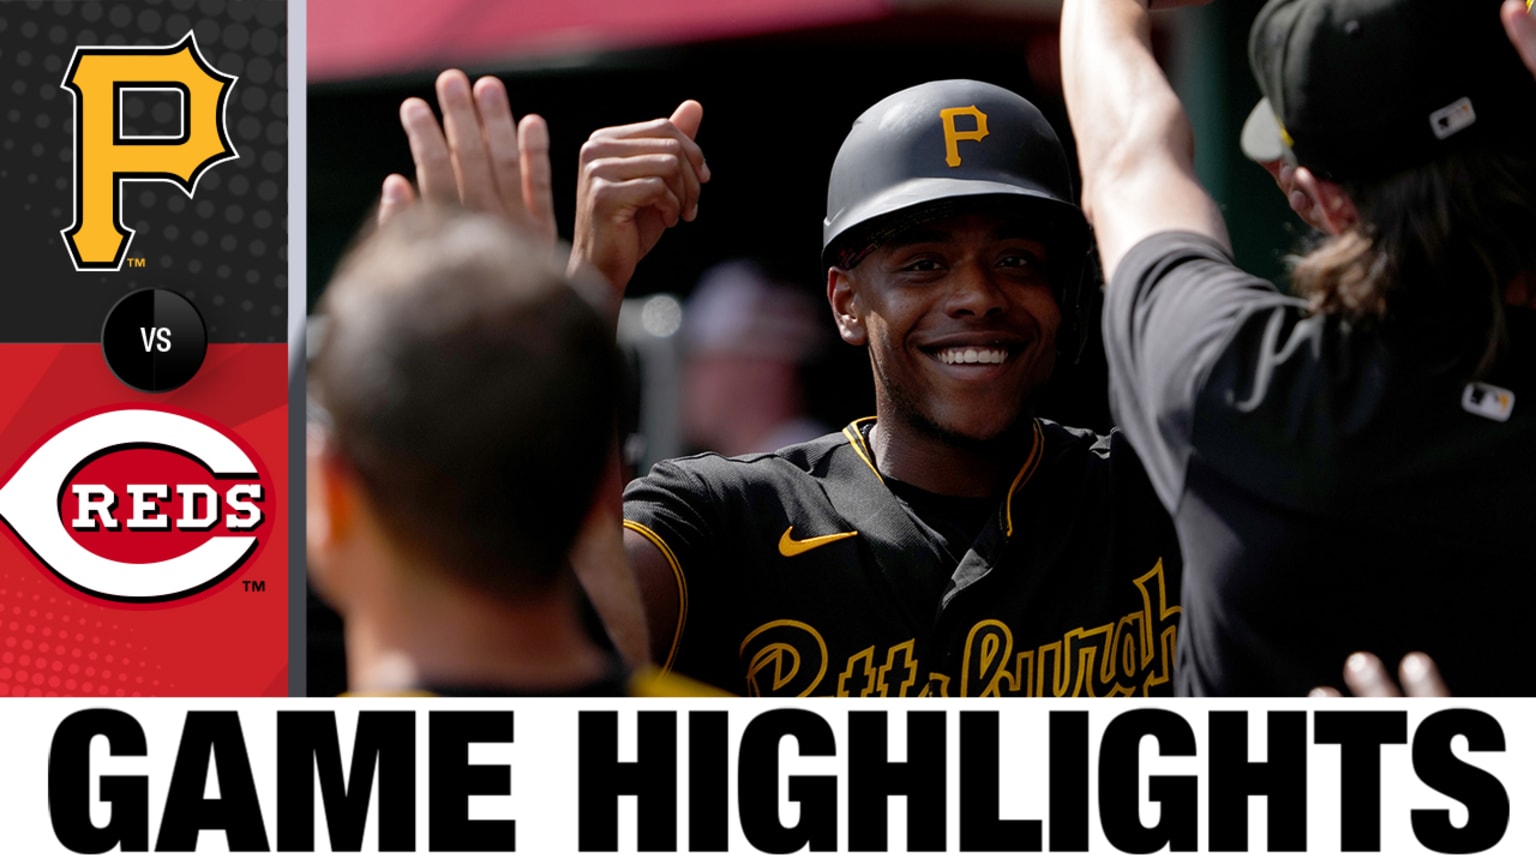 Game Highlights  Pittsburgh Pirates 